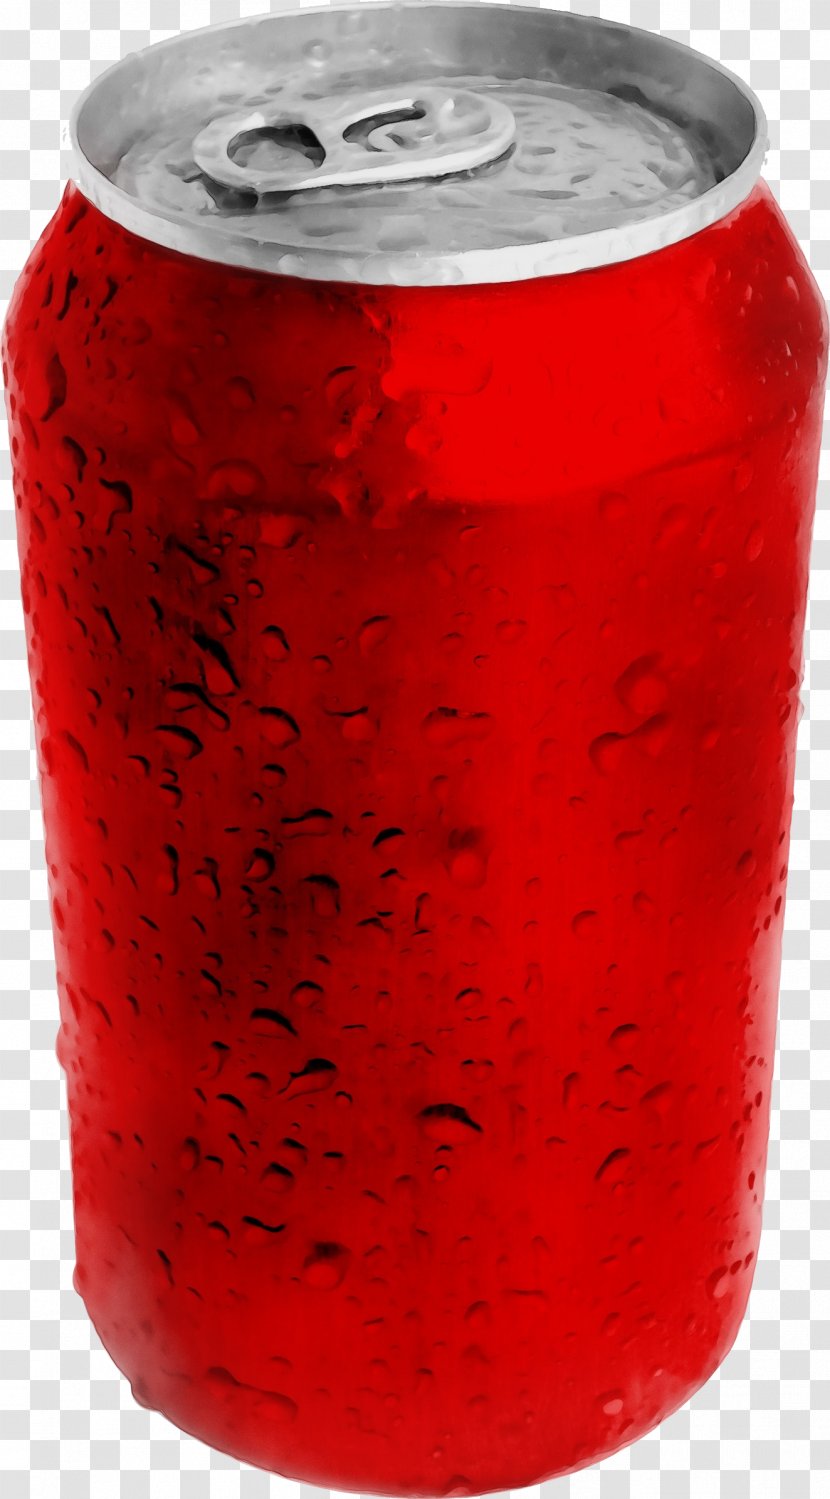 Beverage Can Red Drink Cranberry Juice Non-alcoholic - Wet Ink - Tin Highball Glass Transparent PNG